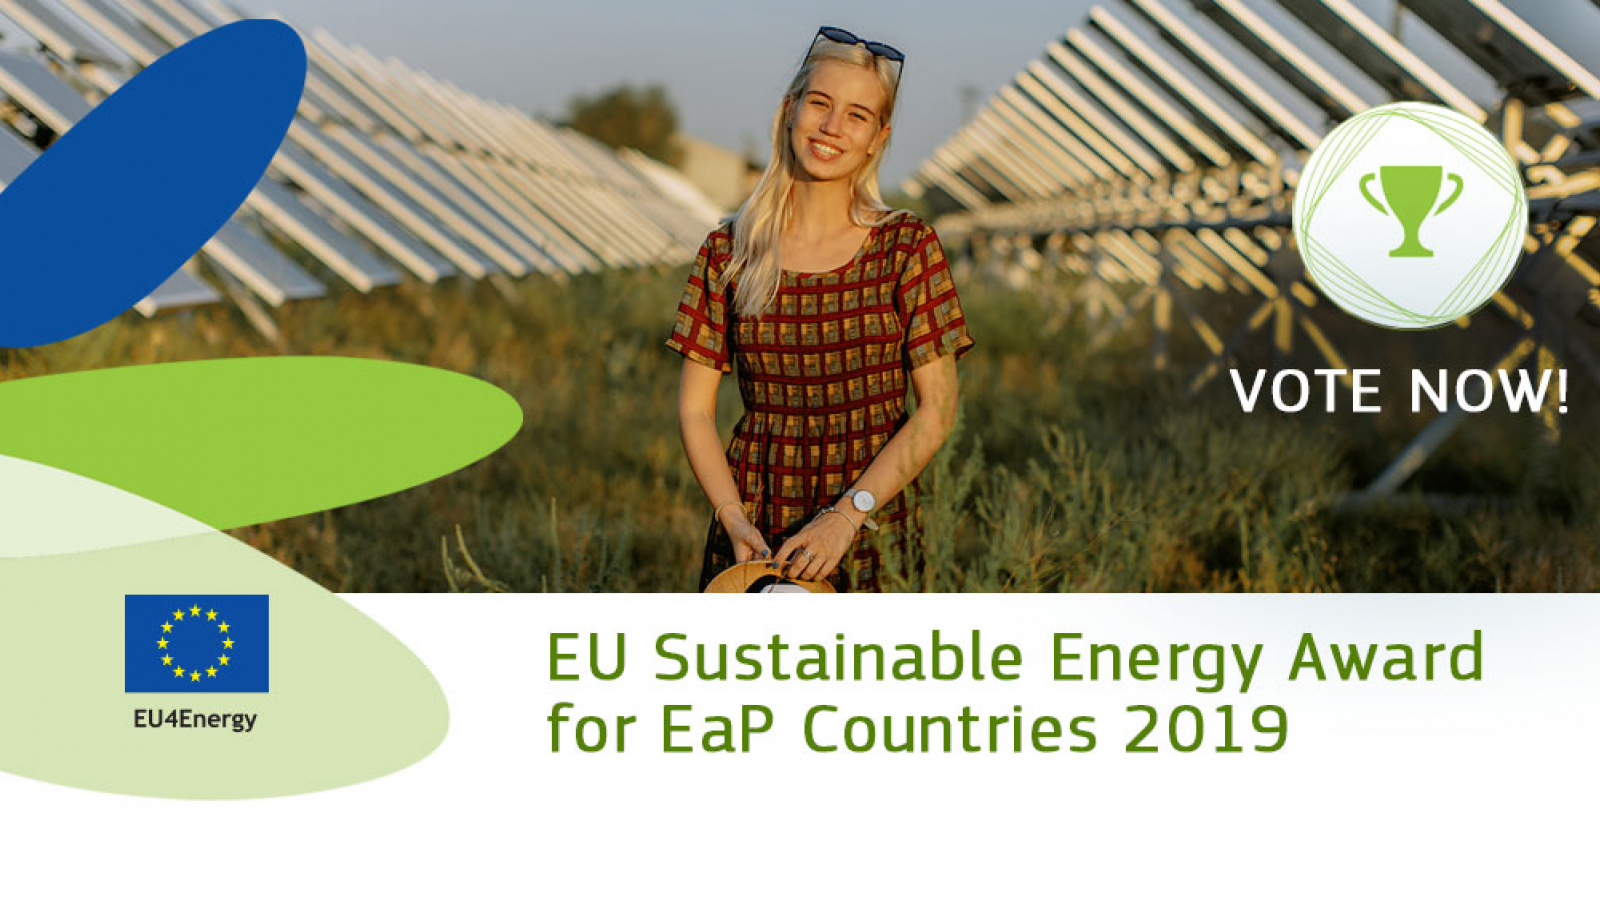 Vote now to select the winner of the EU Sustainable Energy Award for the Eastern Partnership!